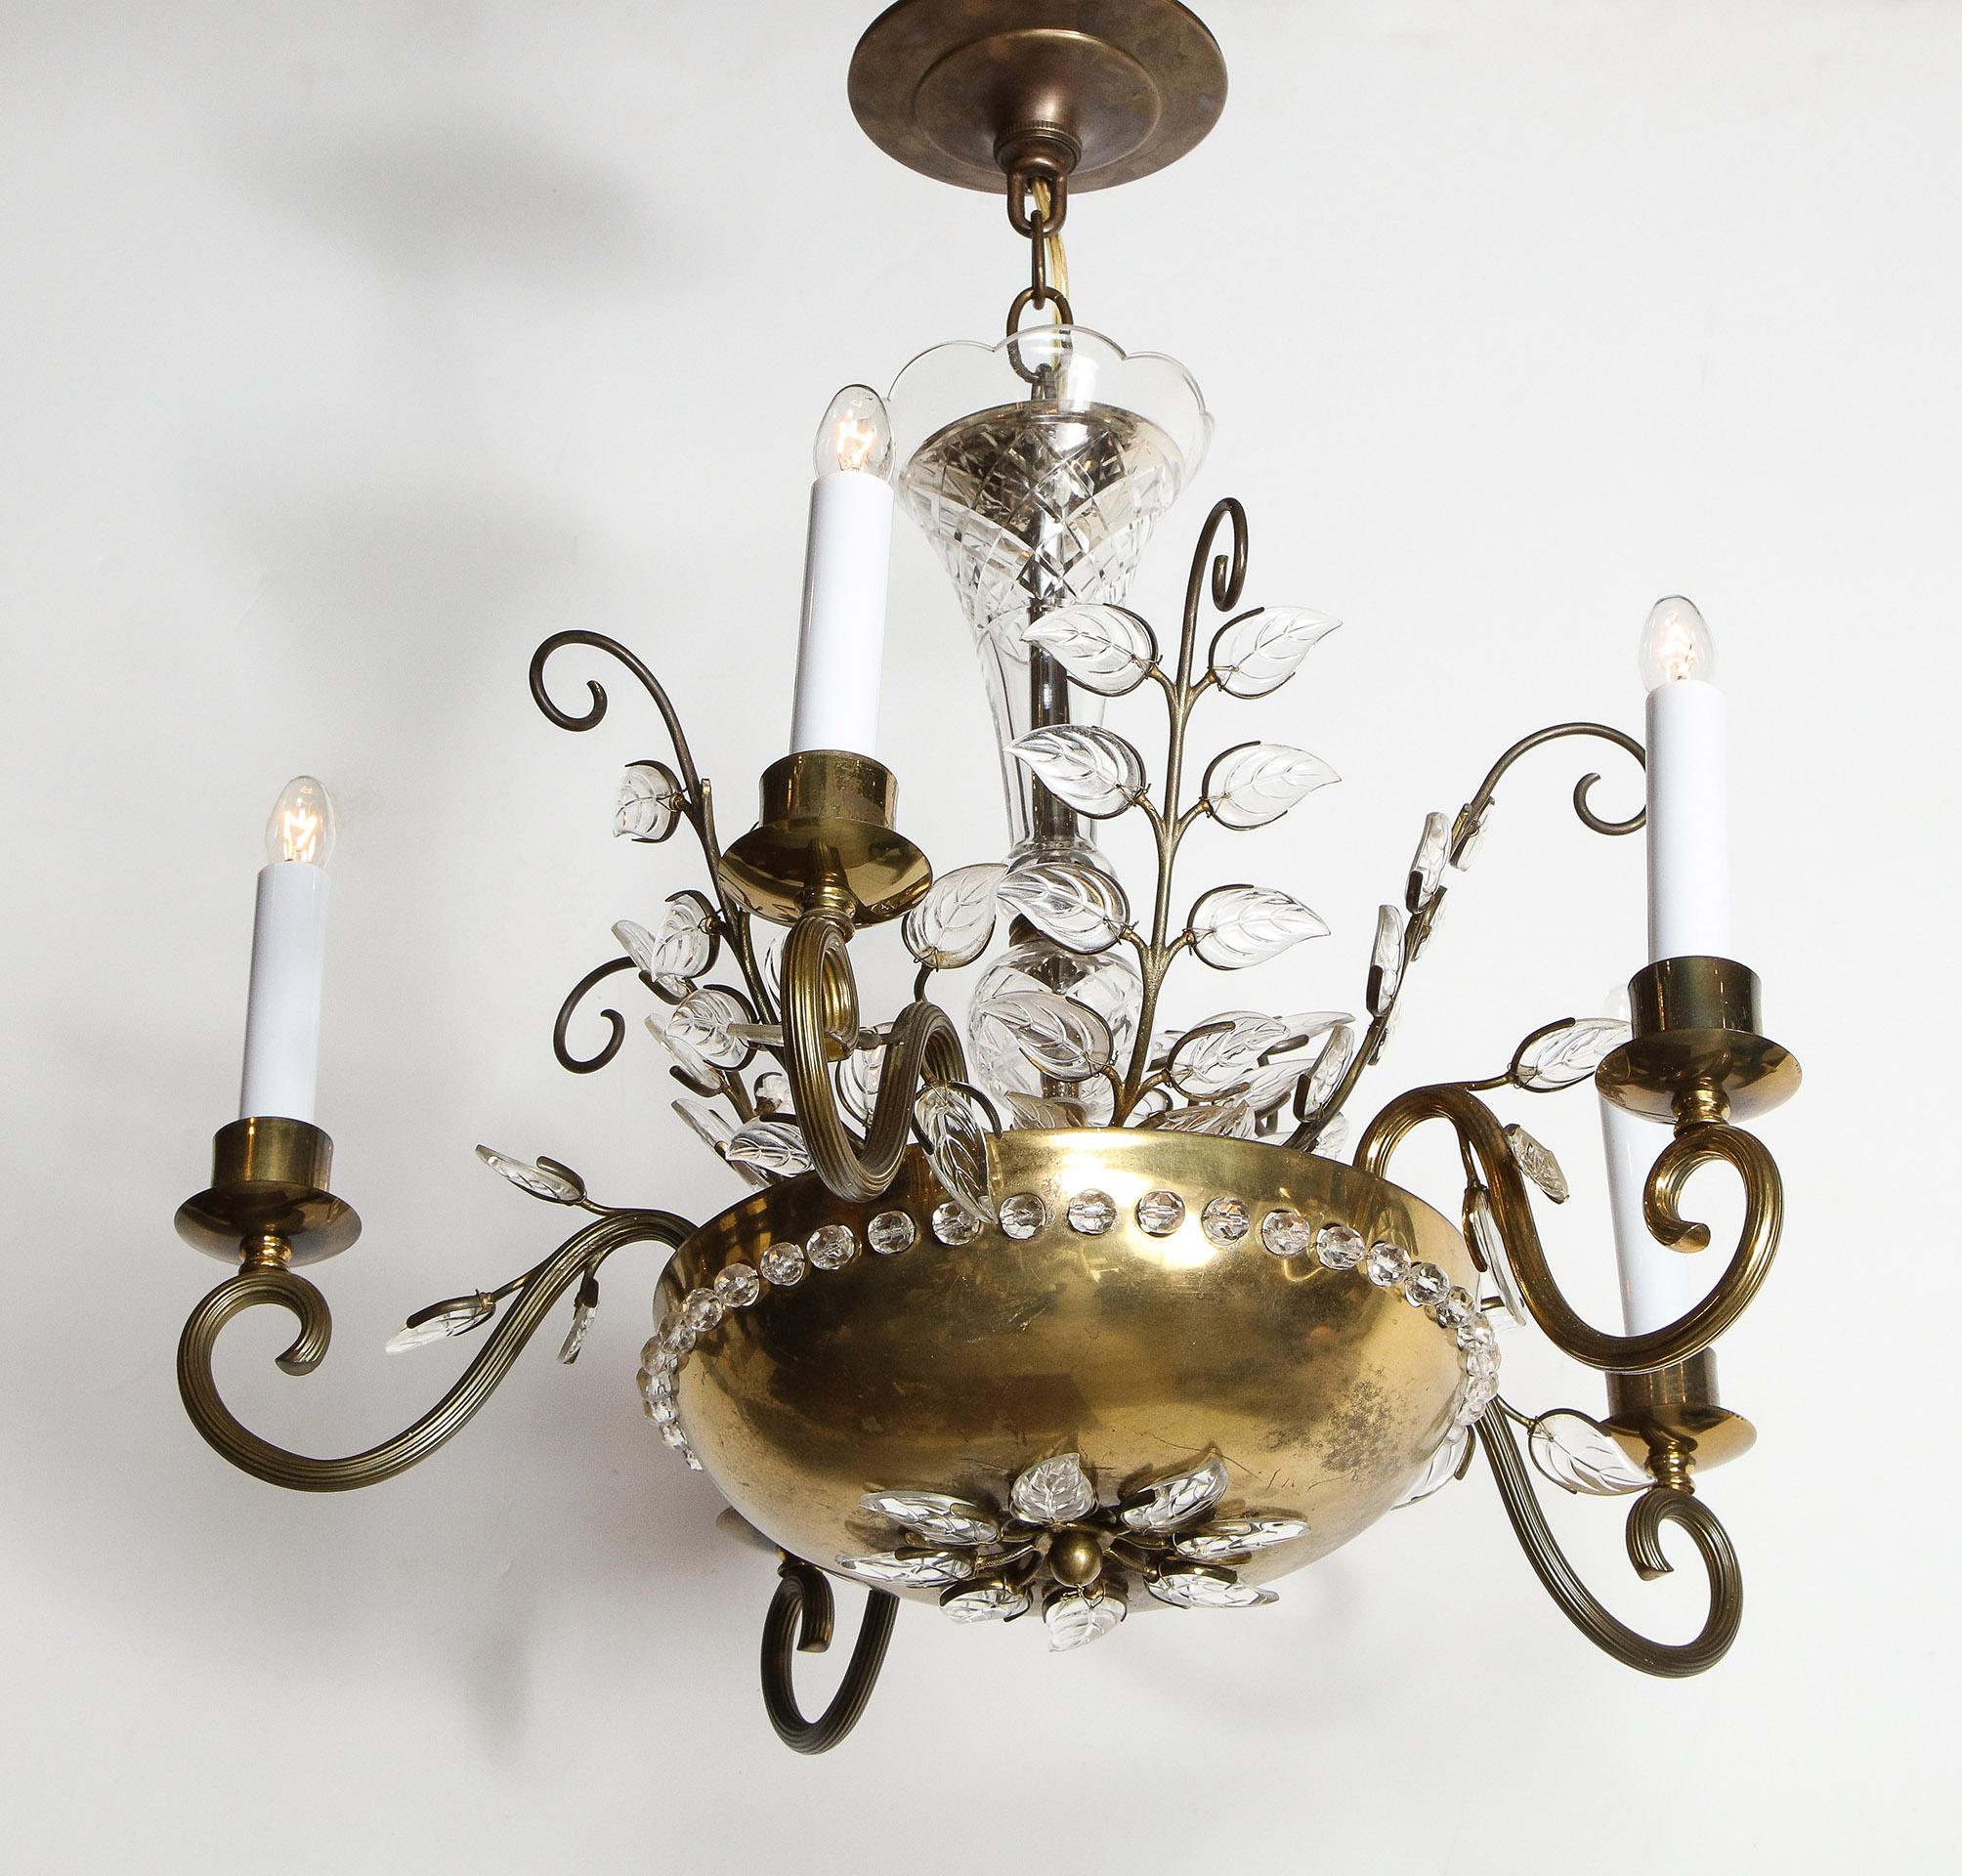 Bagues 5 arm chandelier

Having a central brass bowl with applied glass leaves, supporting 5 